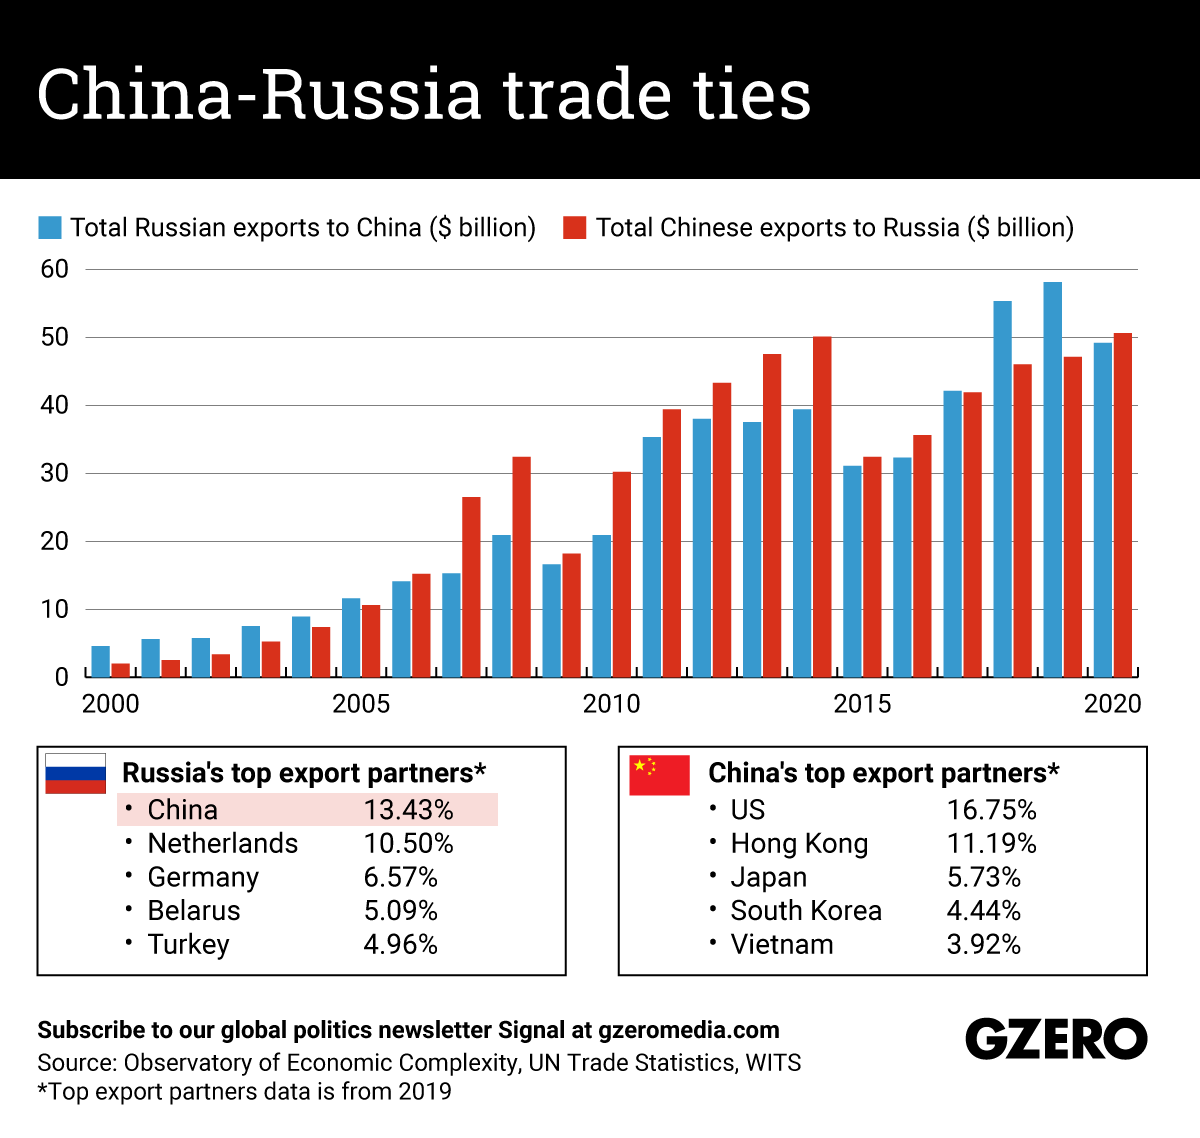 The Graphic Truth: China-Russia trade ties